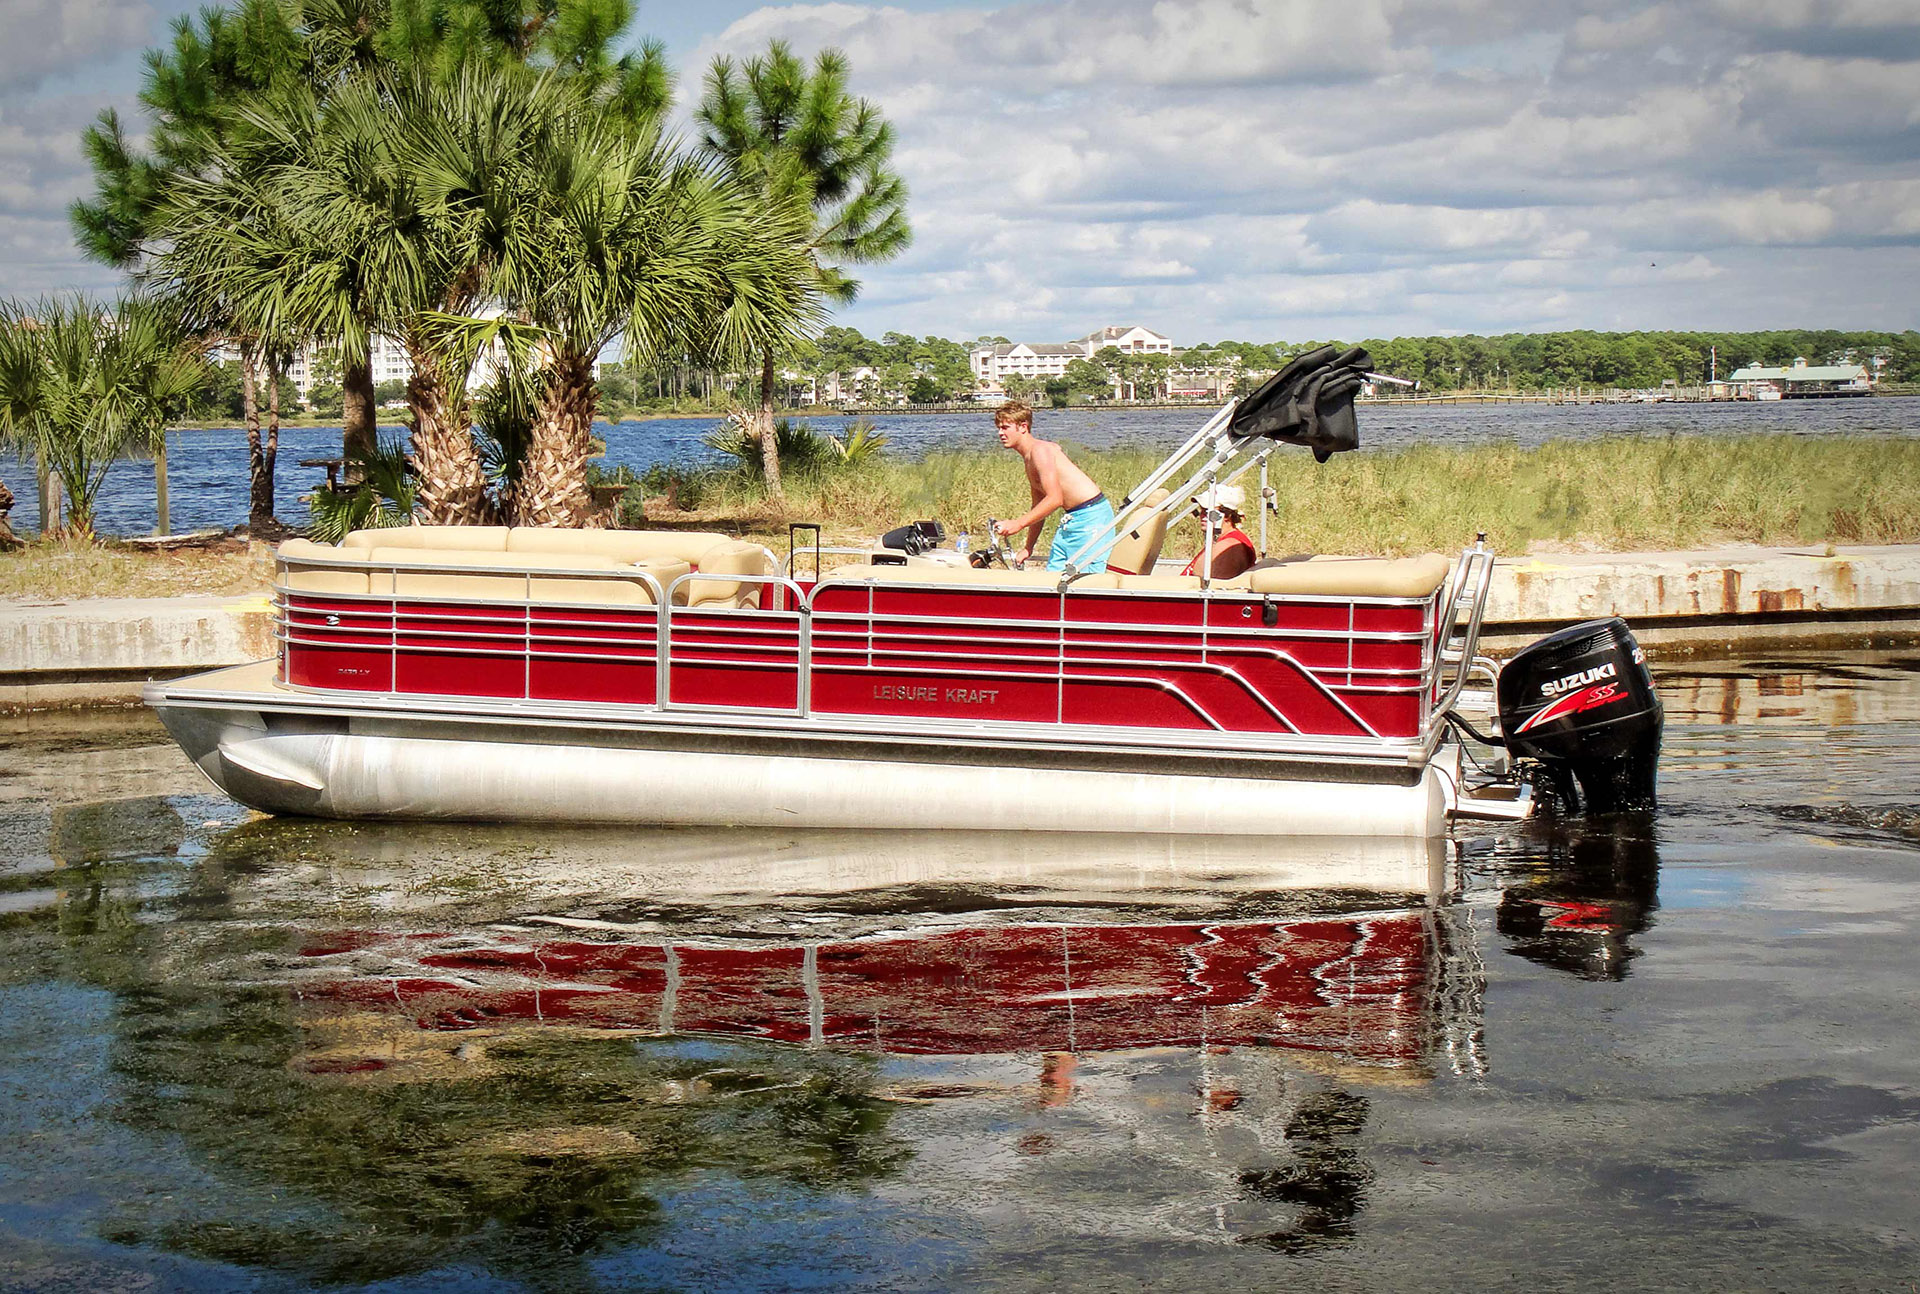  - 20 Years of Experience as a High Quality Pontoon Boat Manufacturer